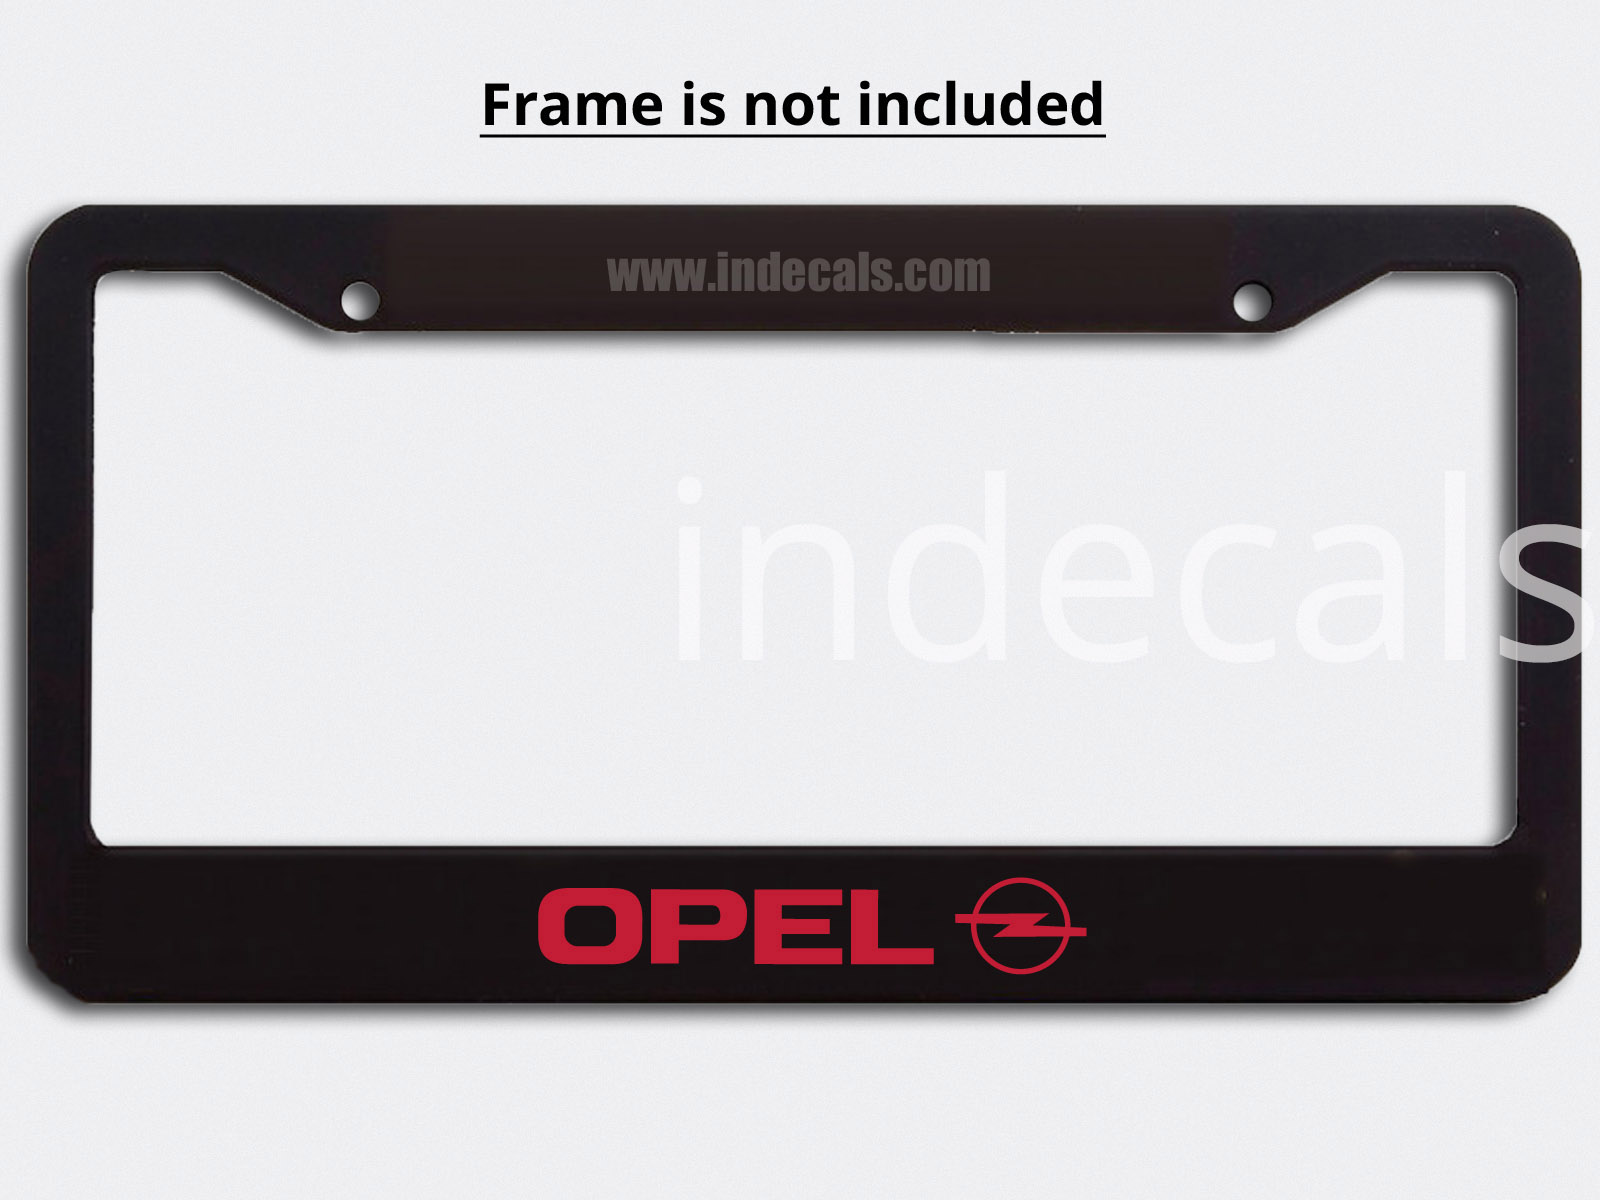 3 x Opel Stickers for Plate Frame - Red